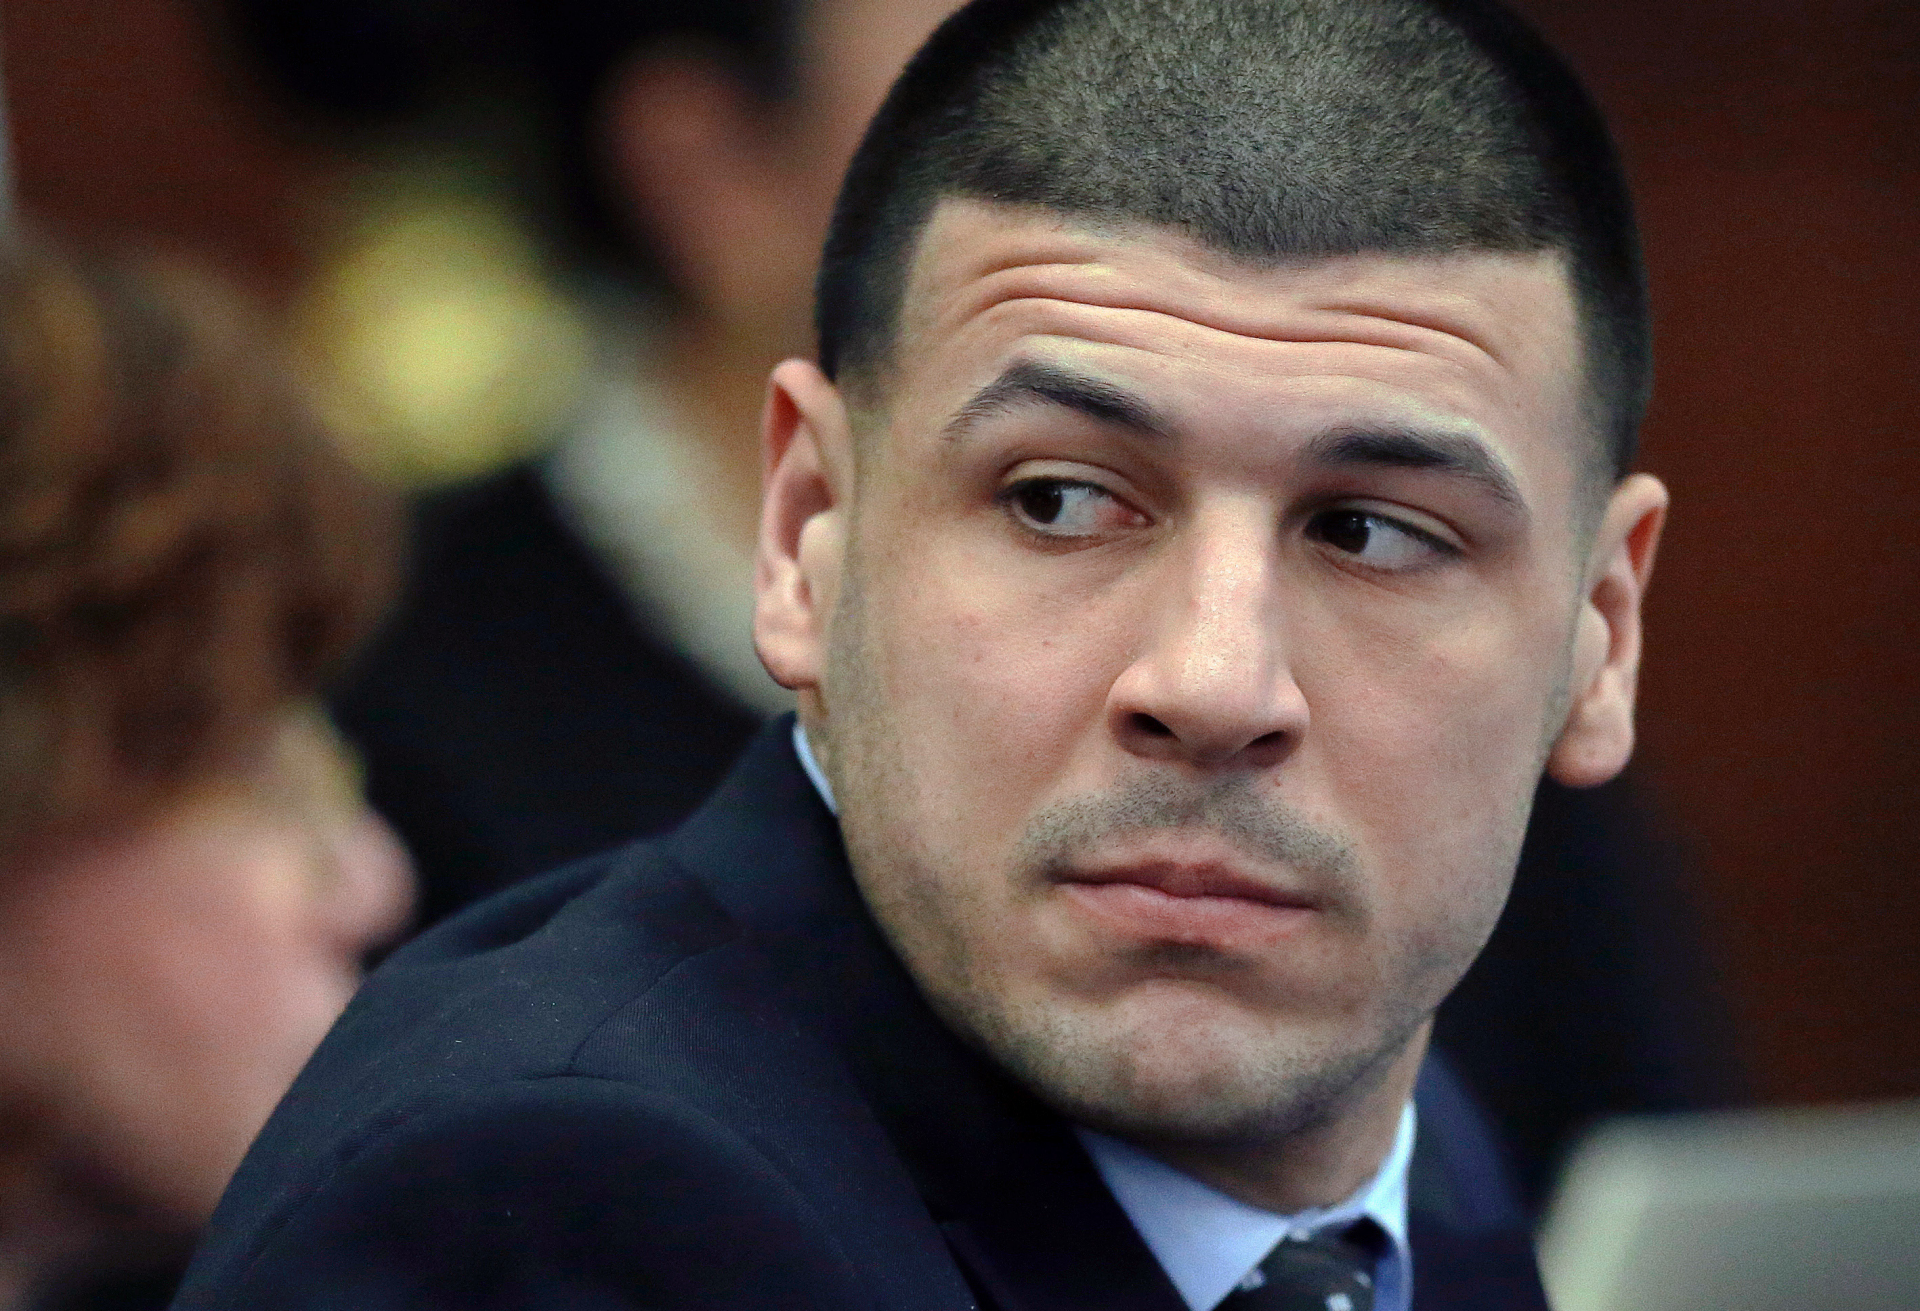 Aaron Hernandez Documentary Reveals His Double Life in Crime and NFL